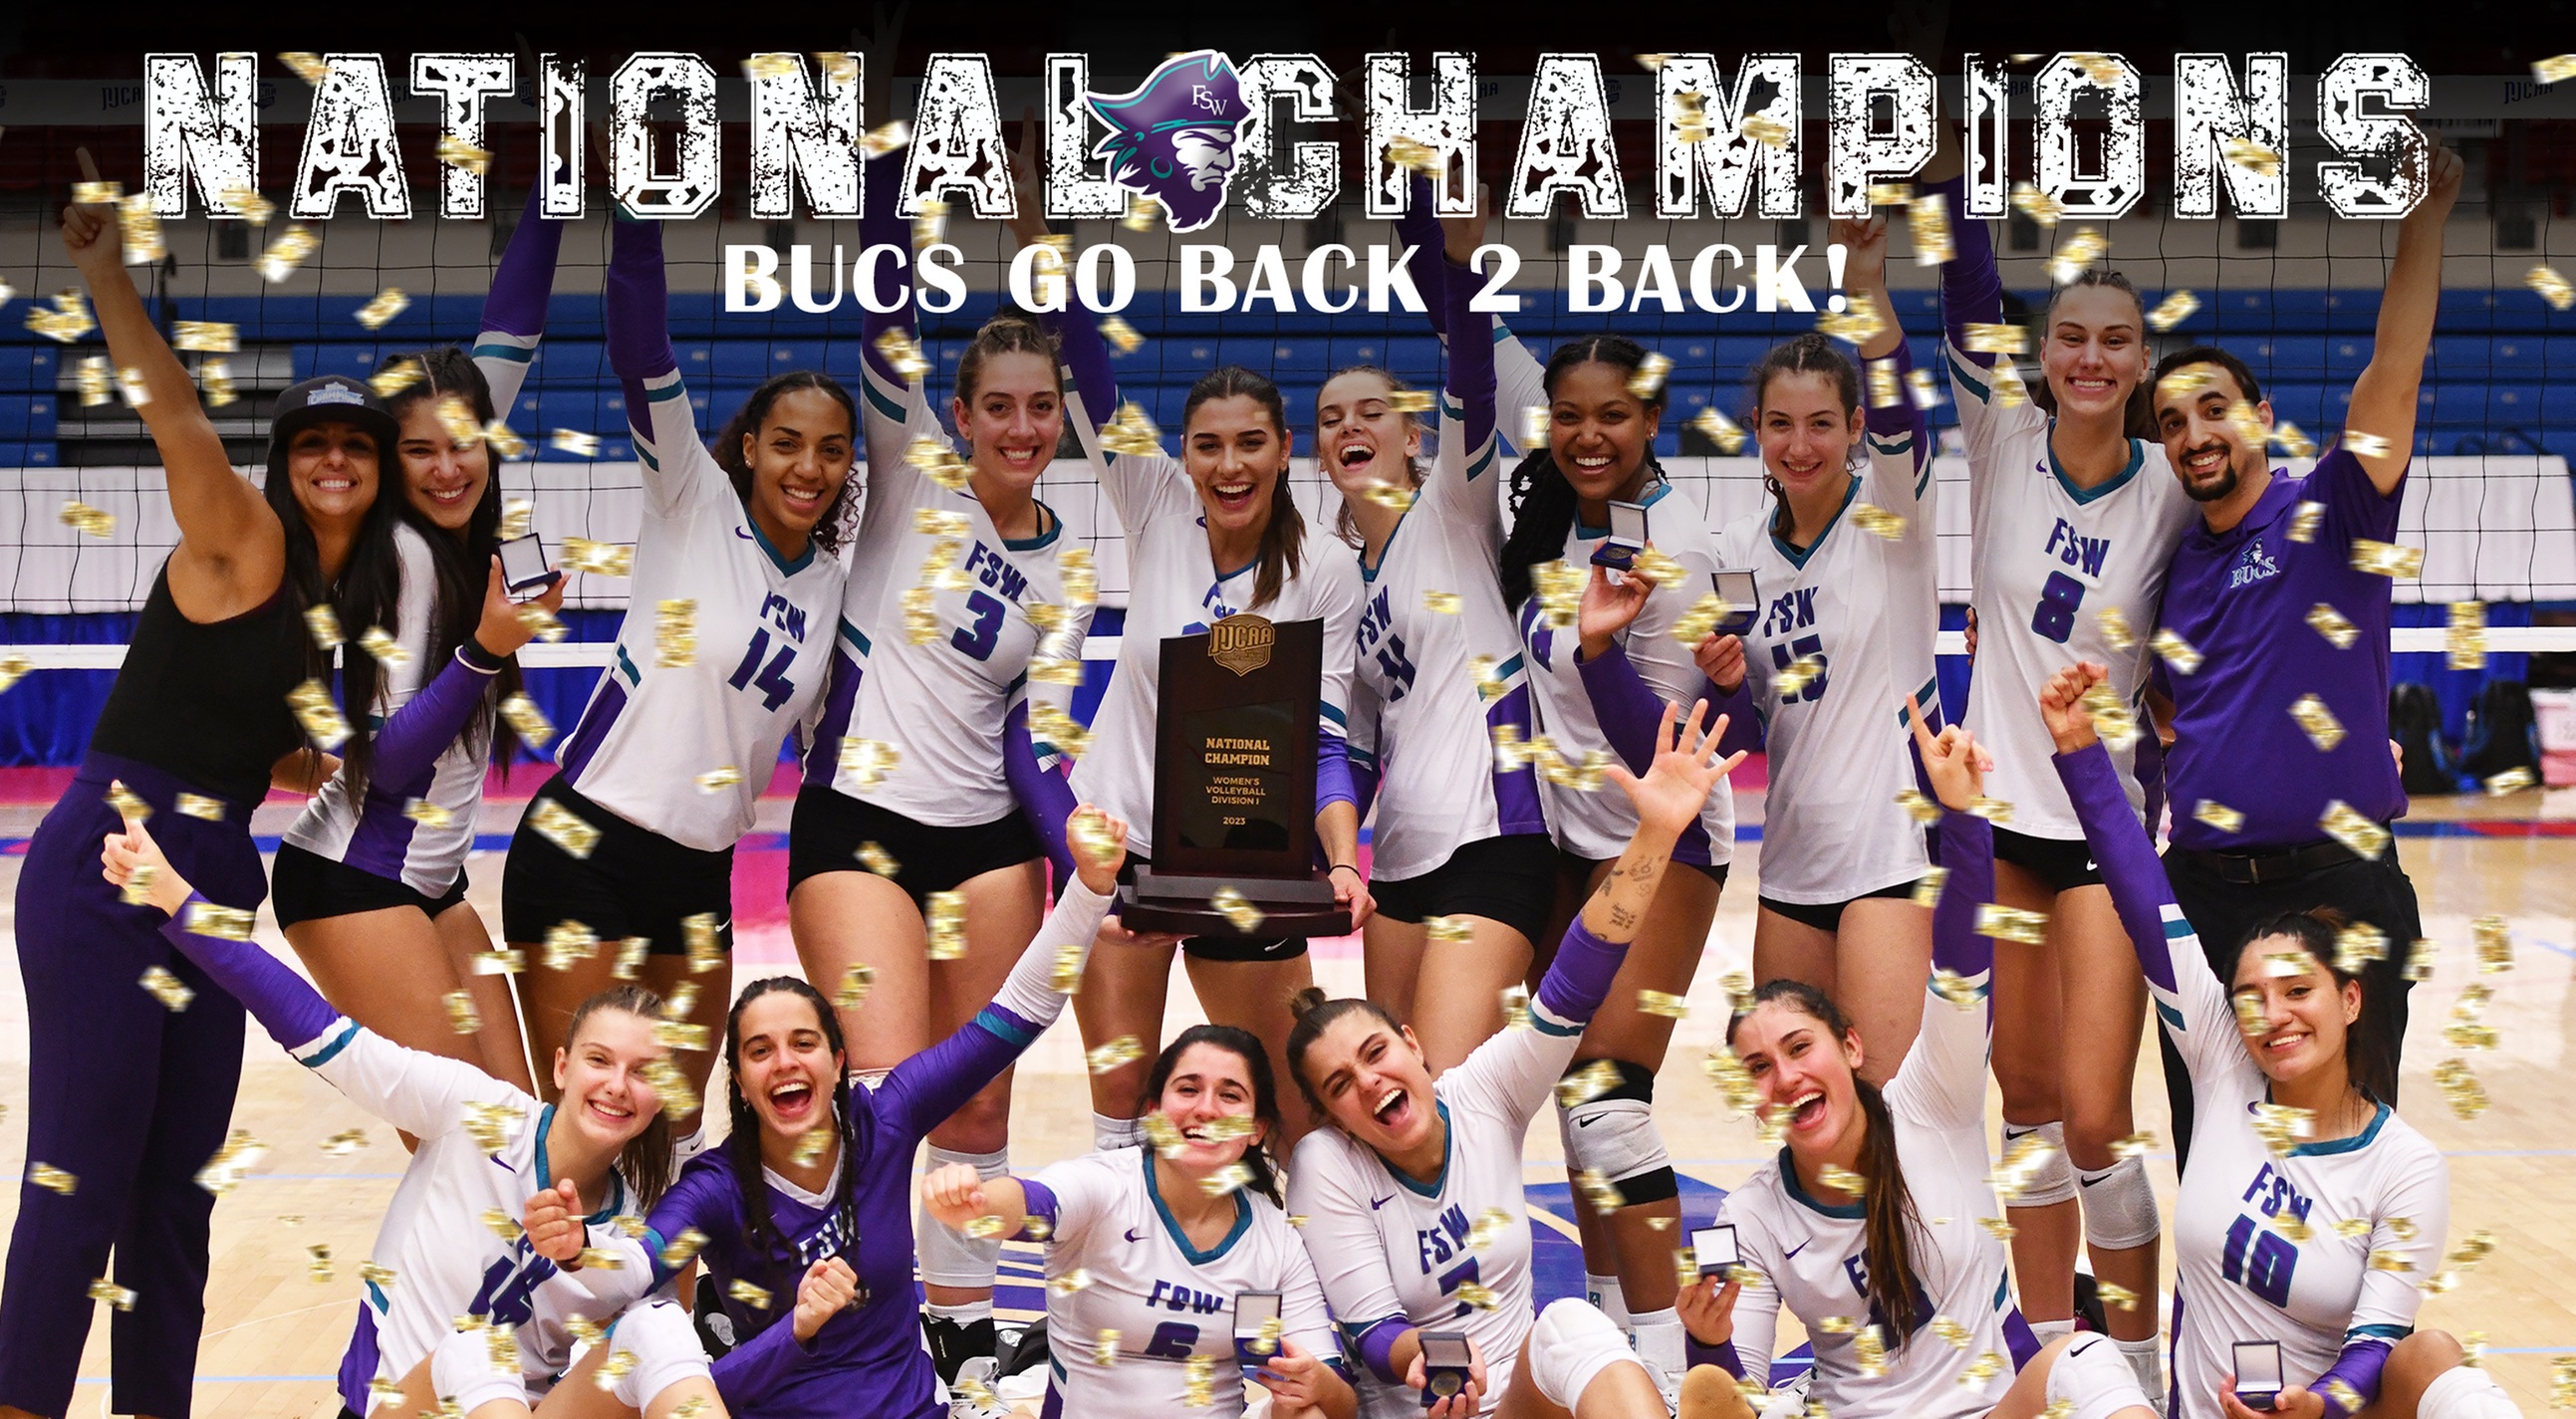 Back to Back! Bucs Win Second Straight NJCAA National Championship